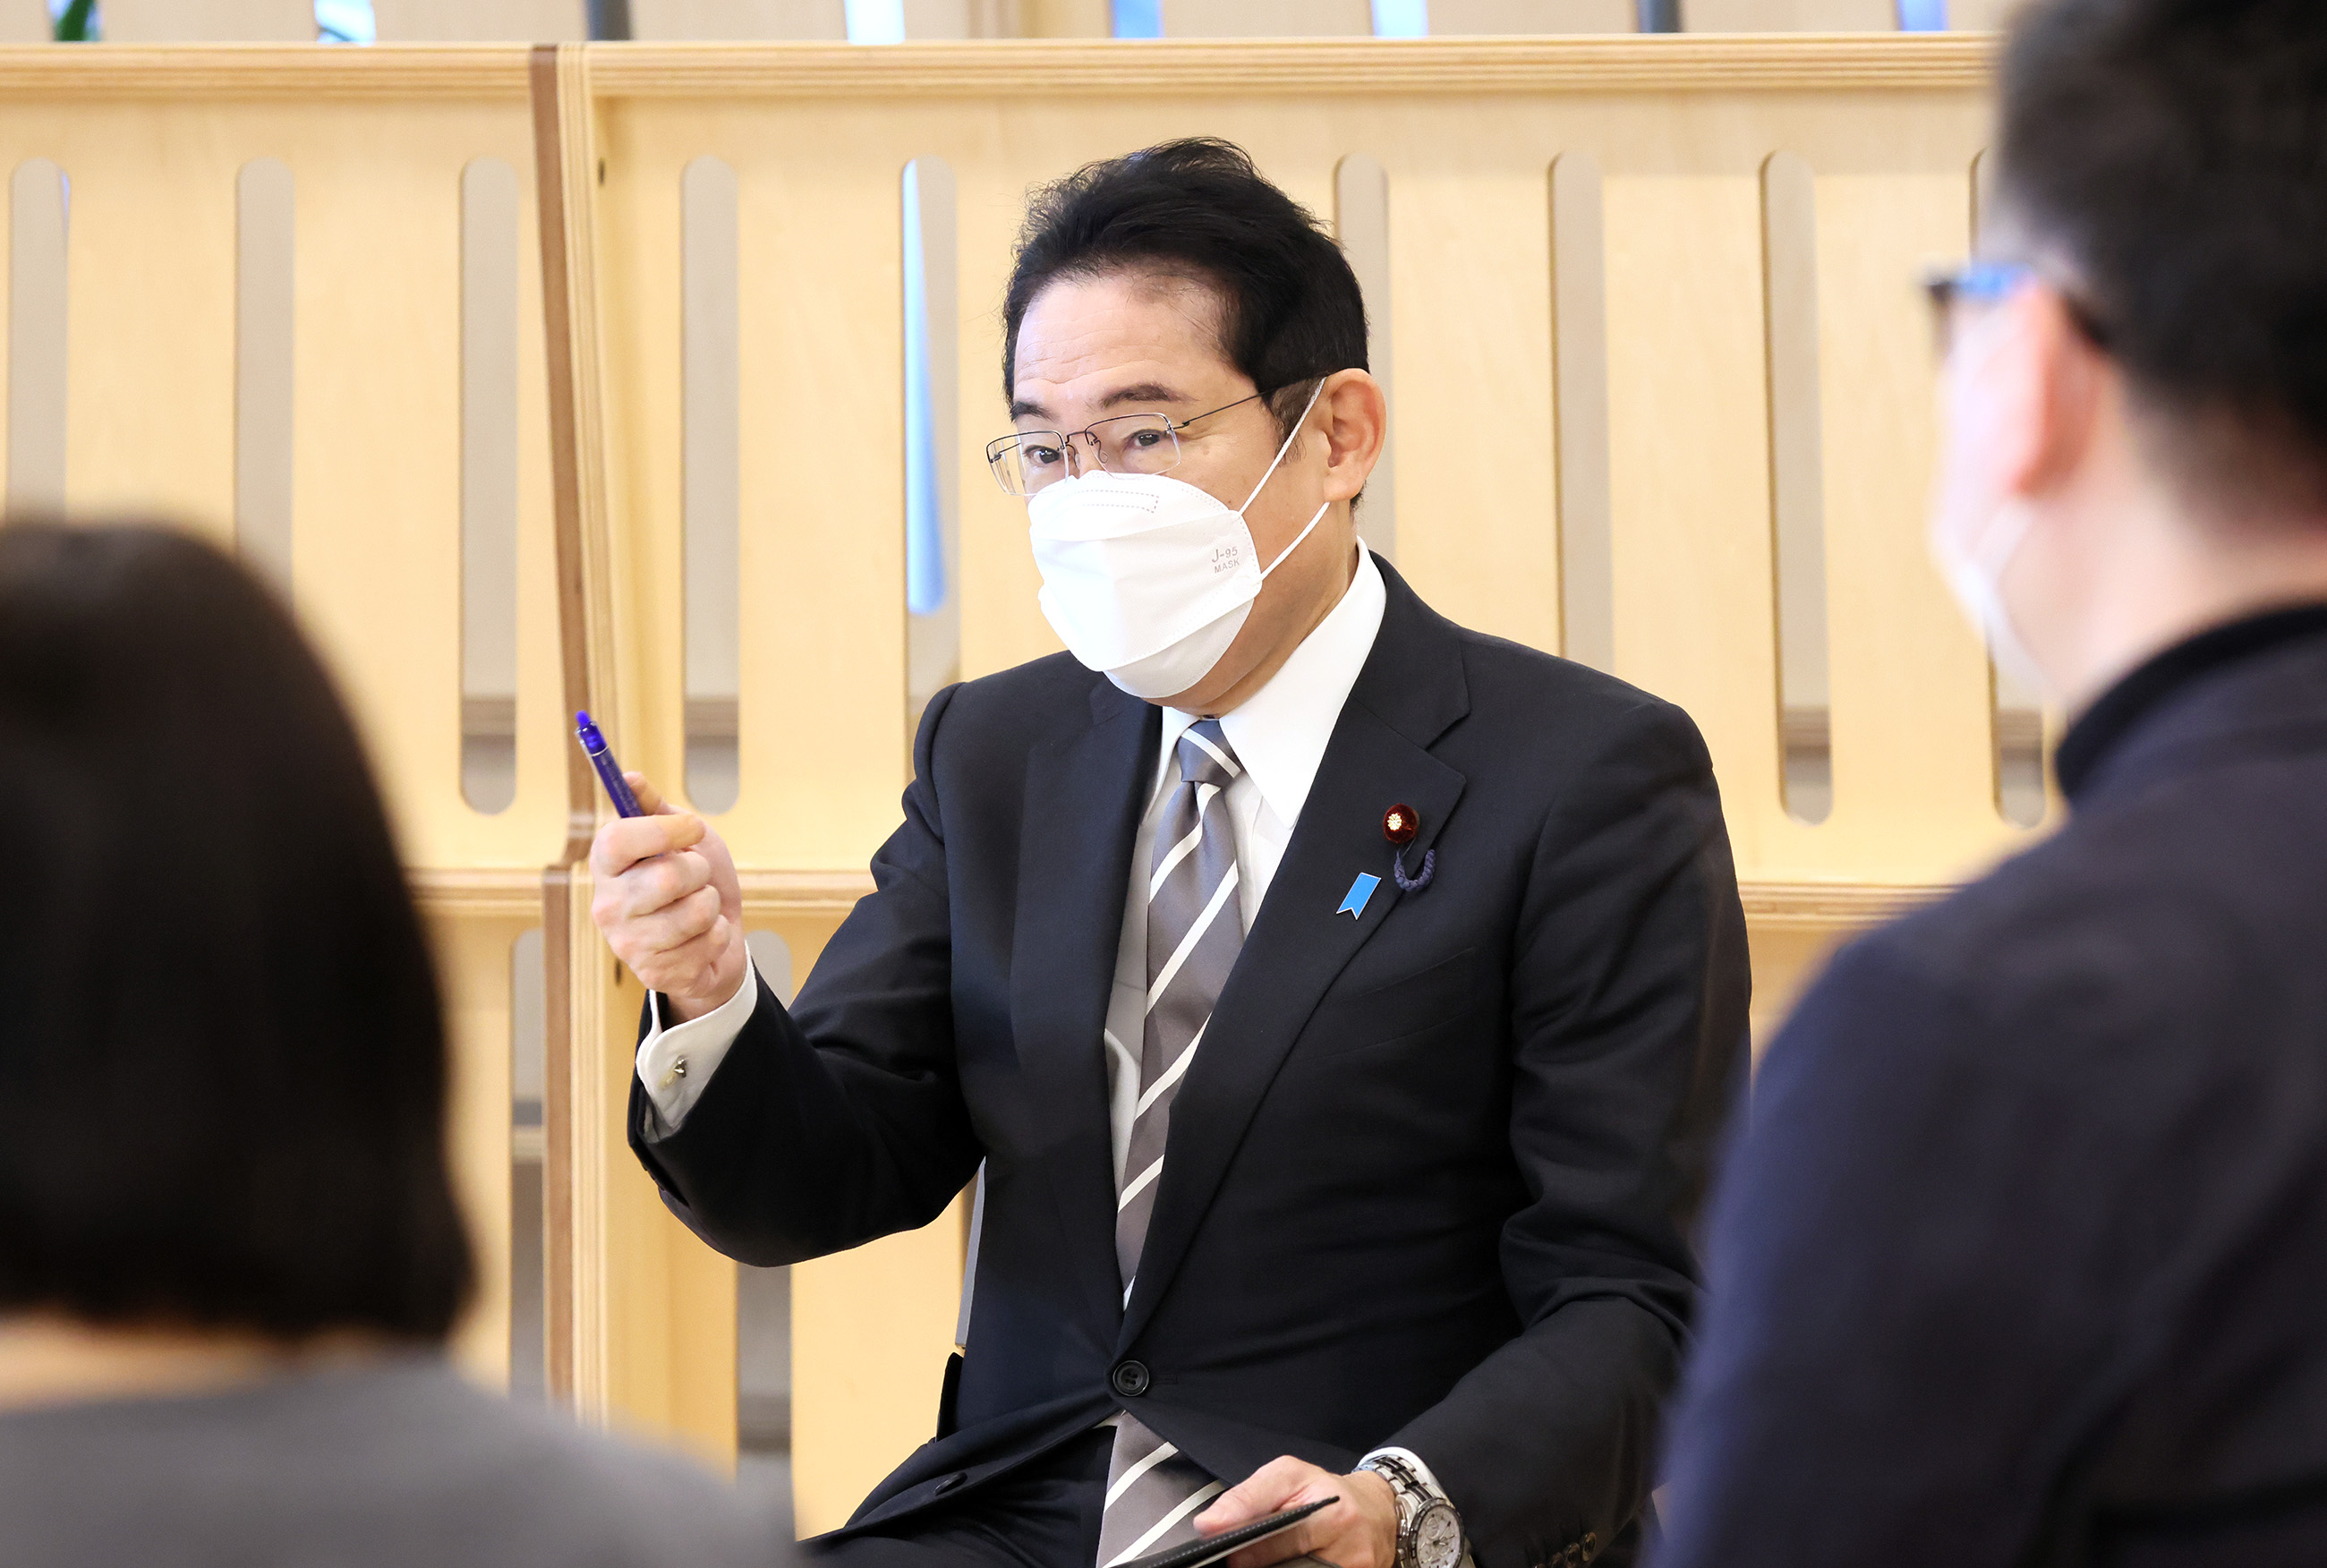 Prime Minister Kishida sitting down to talk with a small group of people (1)